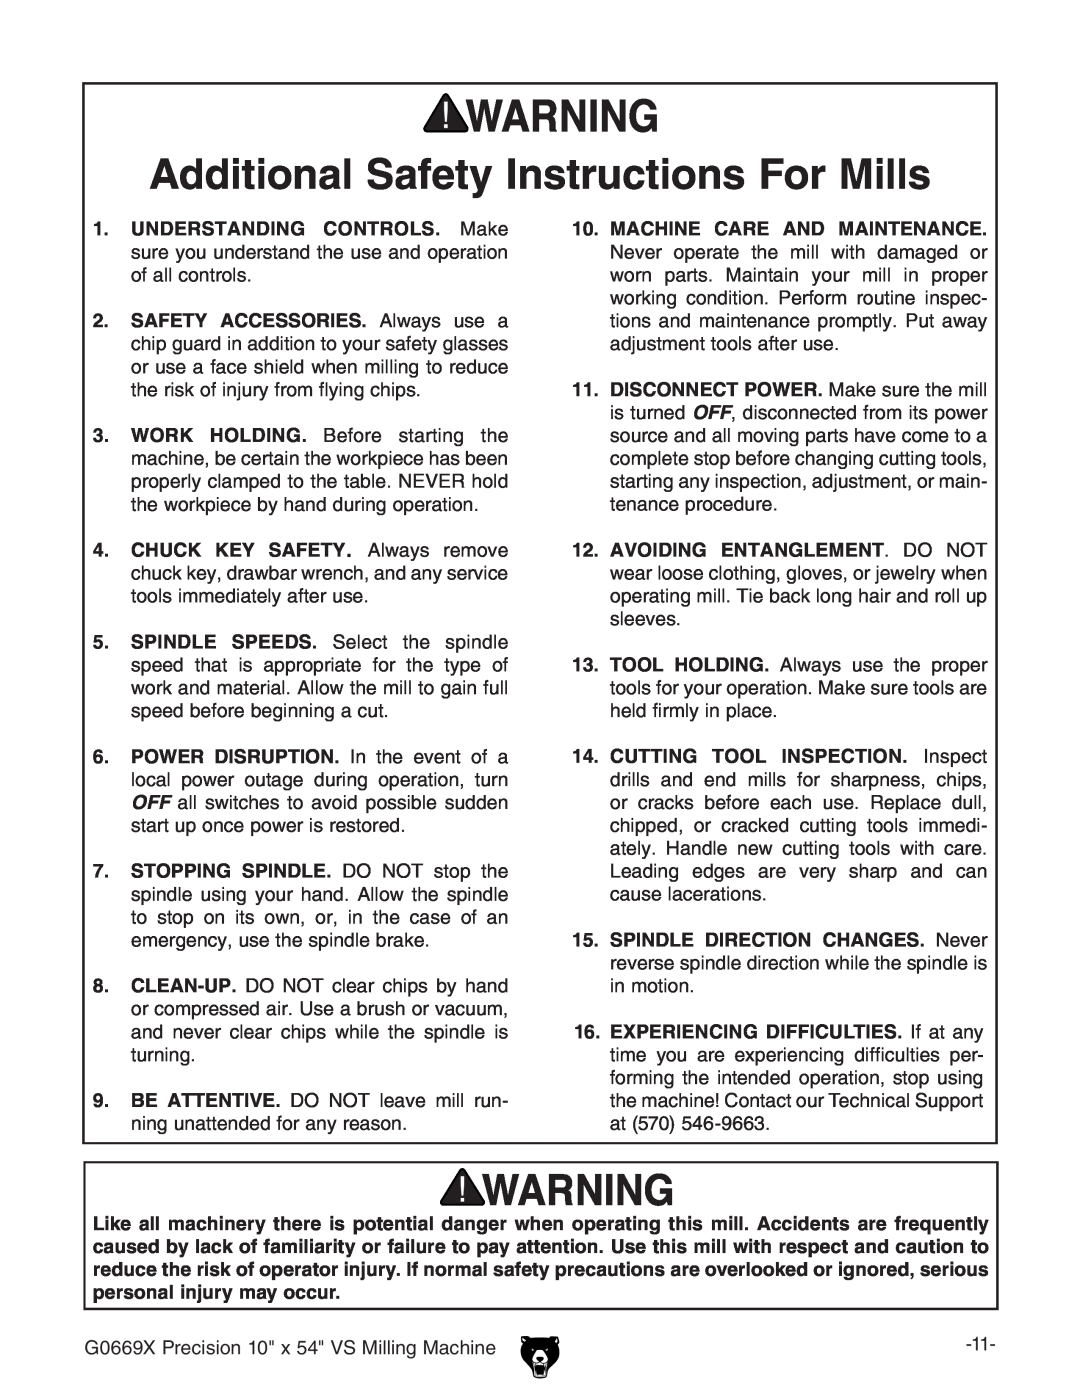 Grizzly g0669X owner manual Additional Safety Instructions For Mills, Machine Care And Maintenance 